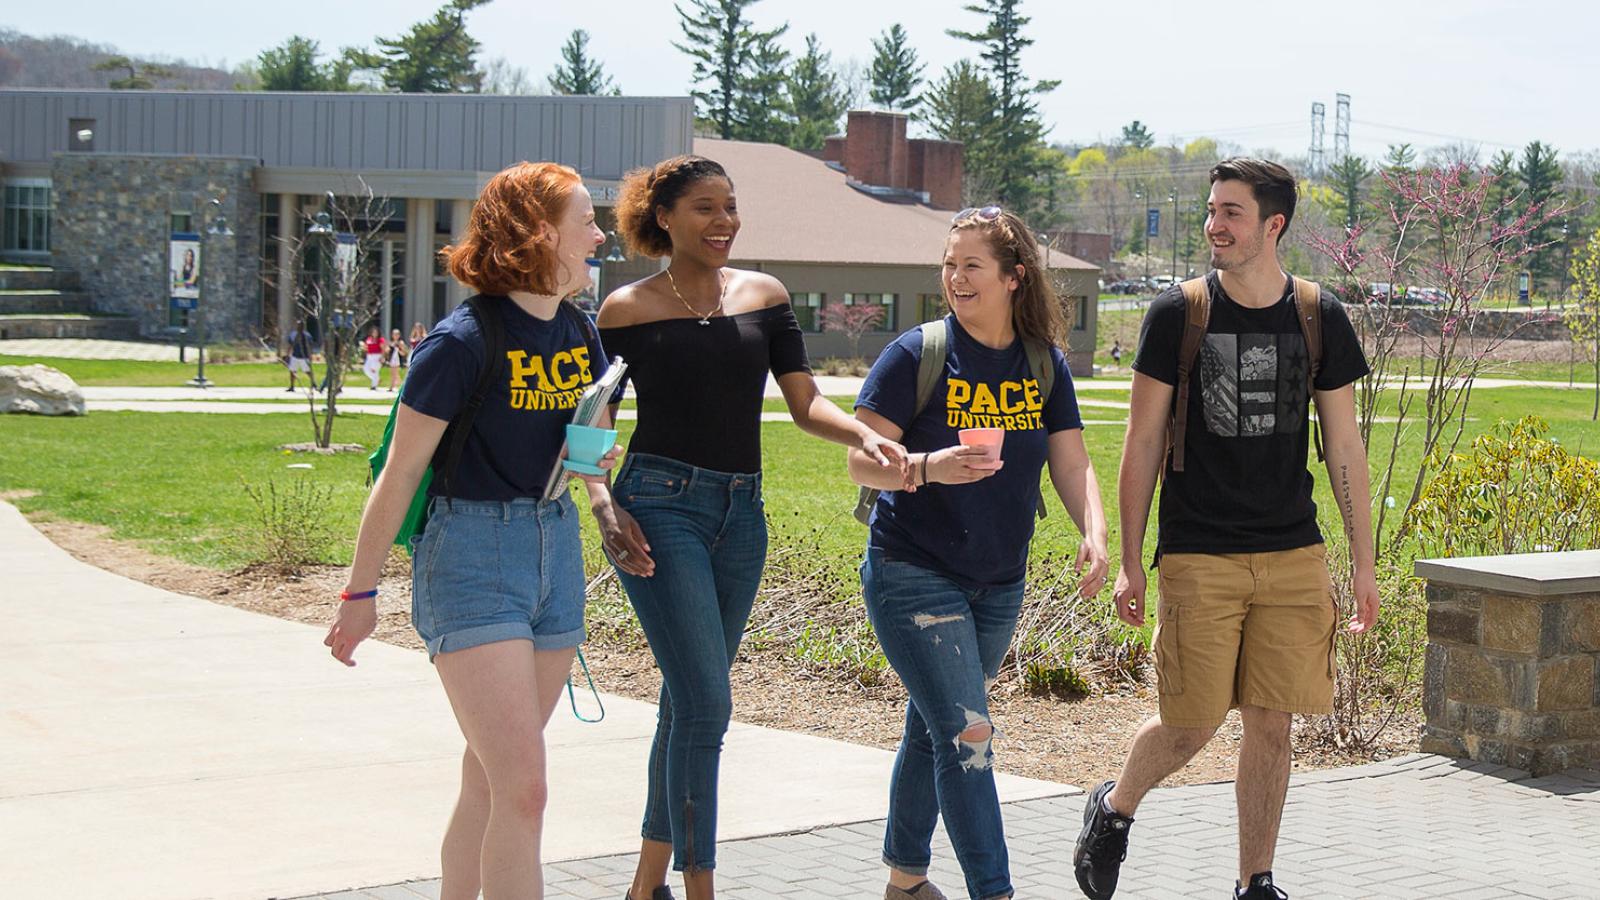 Students enjoying a sunny day on the Westchester campus.